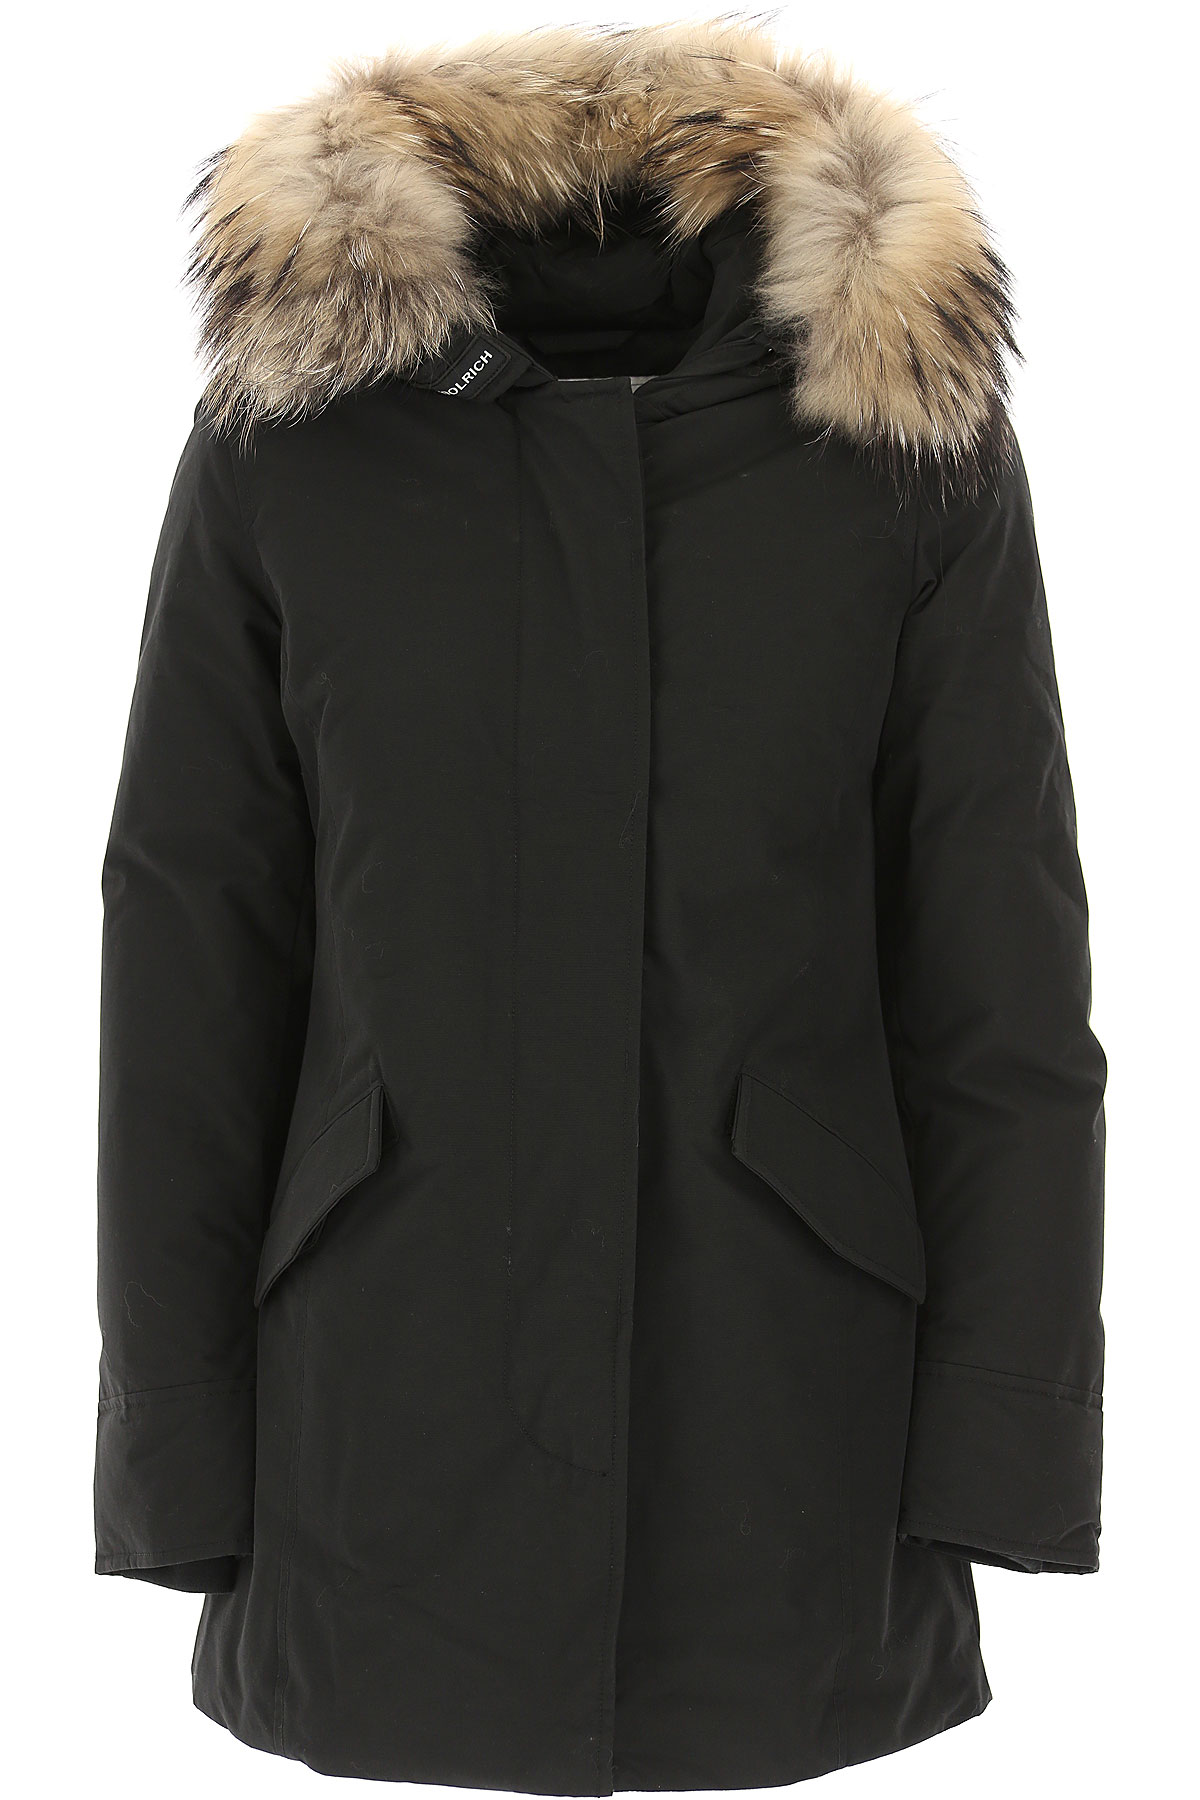 Womens Clothing Woolrich, Style code: wwcps2762-ut0001-blk